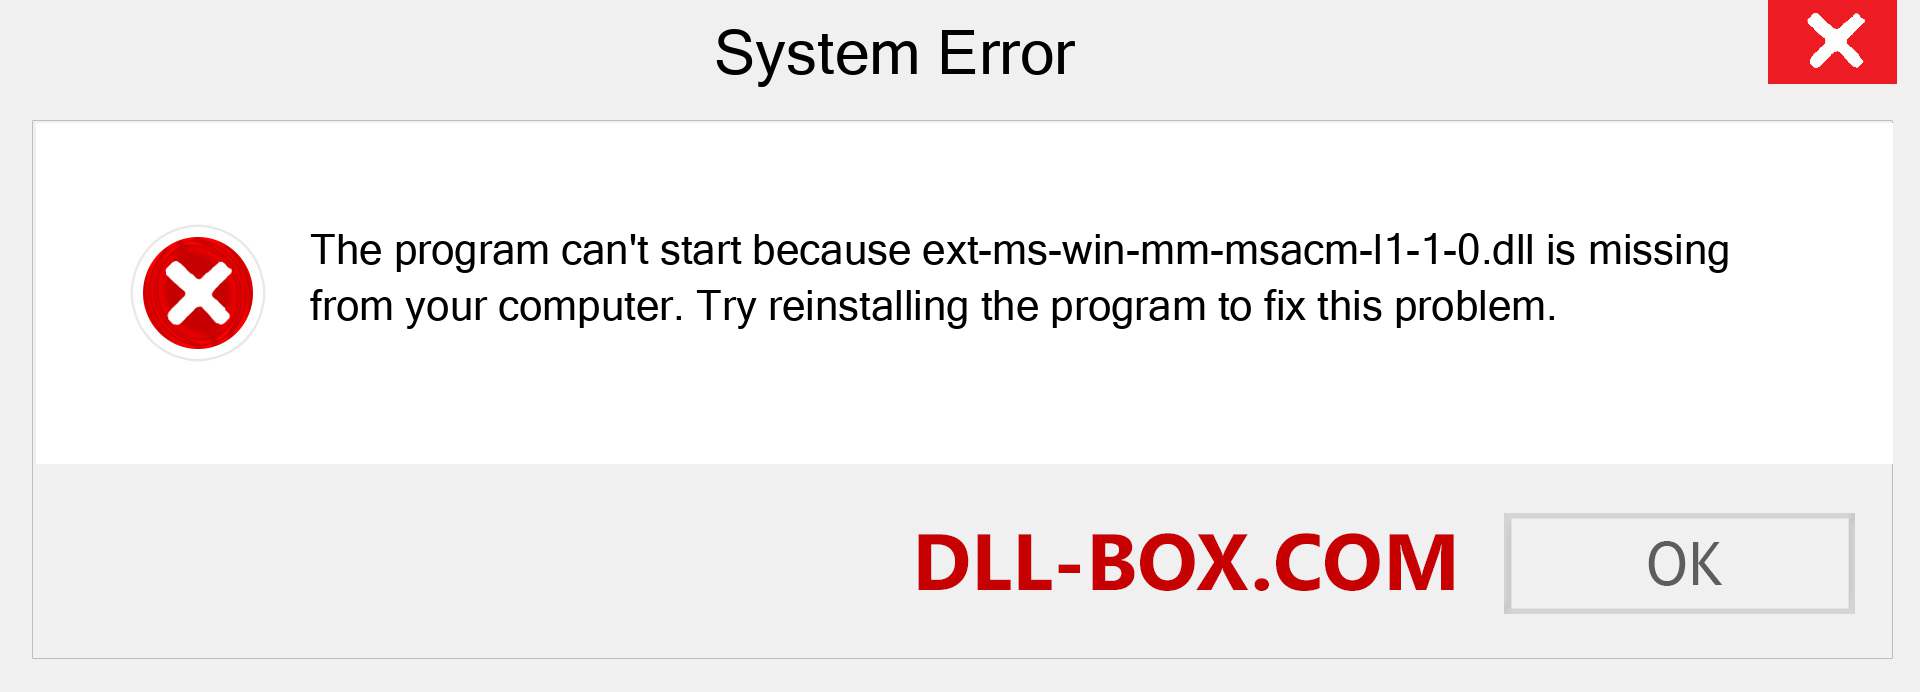  ext-ms-win-mm-msacm-l1-1-0.dll file is missing?. Download for Windows 7, 8, 10 - Fix  ext-ms-win-mm-msacm-l1-1-0 dll Missing Error on Windows, photos, images